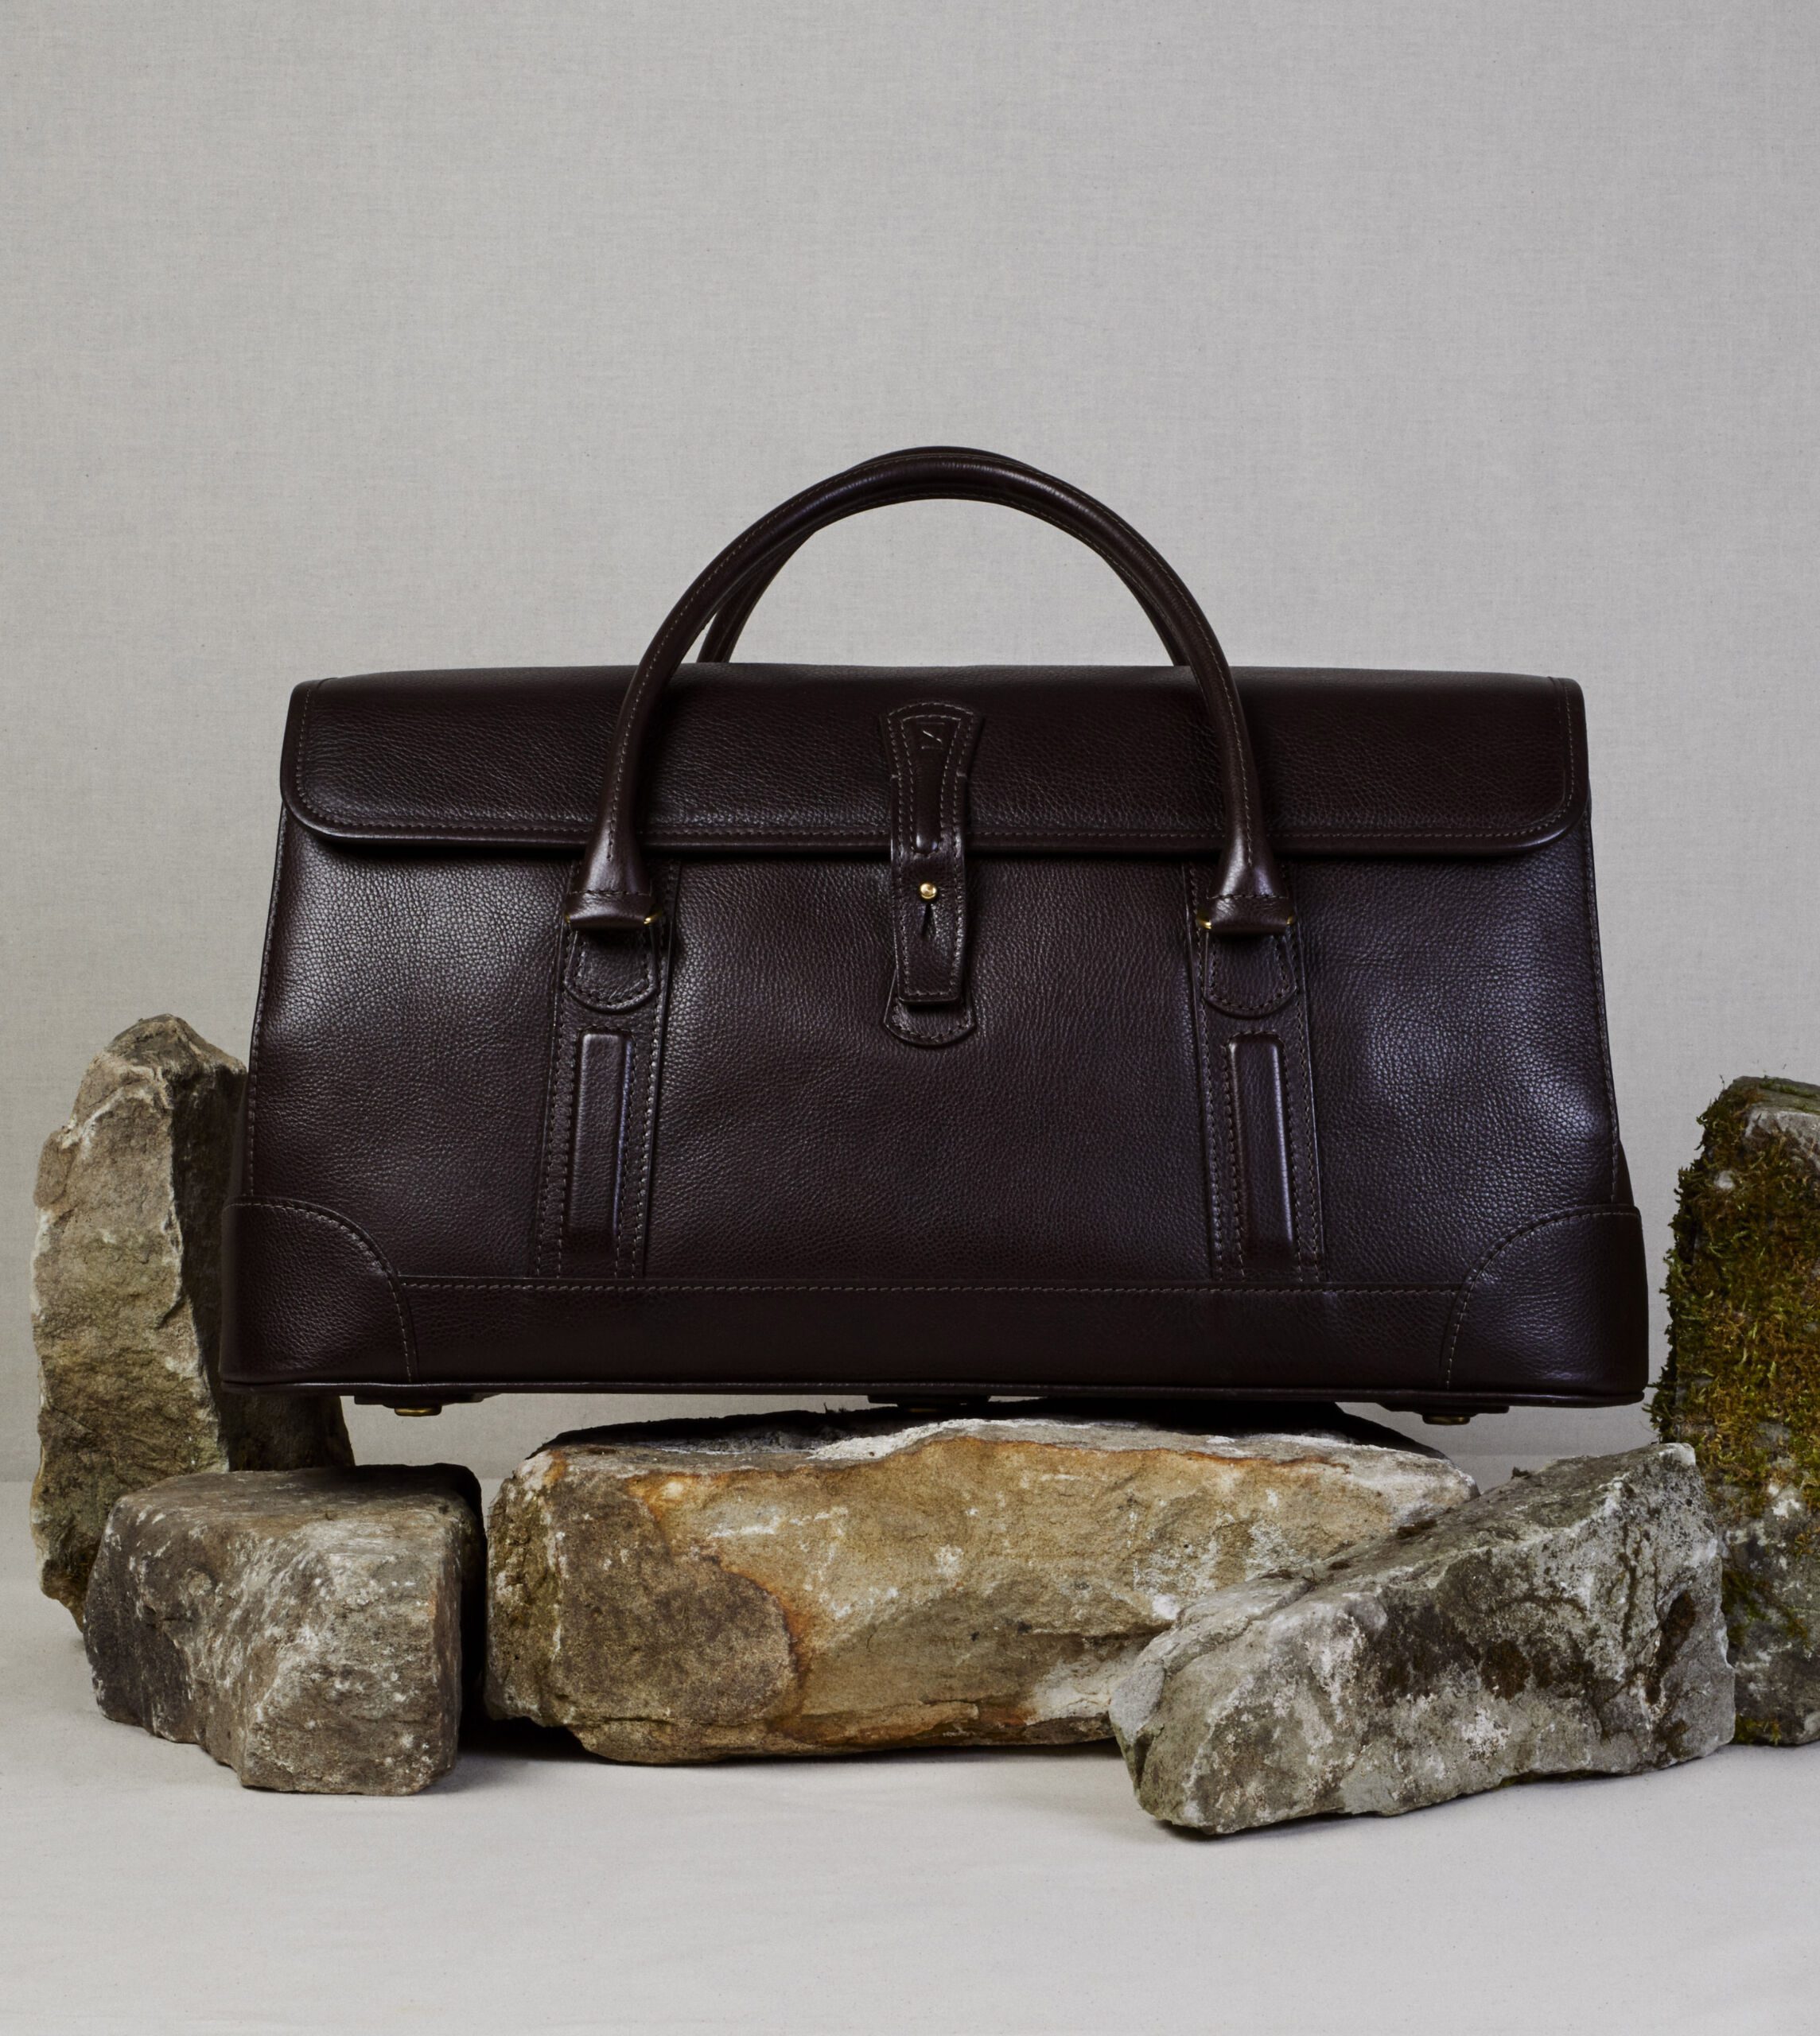 Chapman Bags - The Wye Work Bag, a generously size work bag, but can also  work as a great travel bag for overnight business trips. Now in our summer  sale in limited